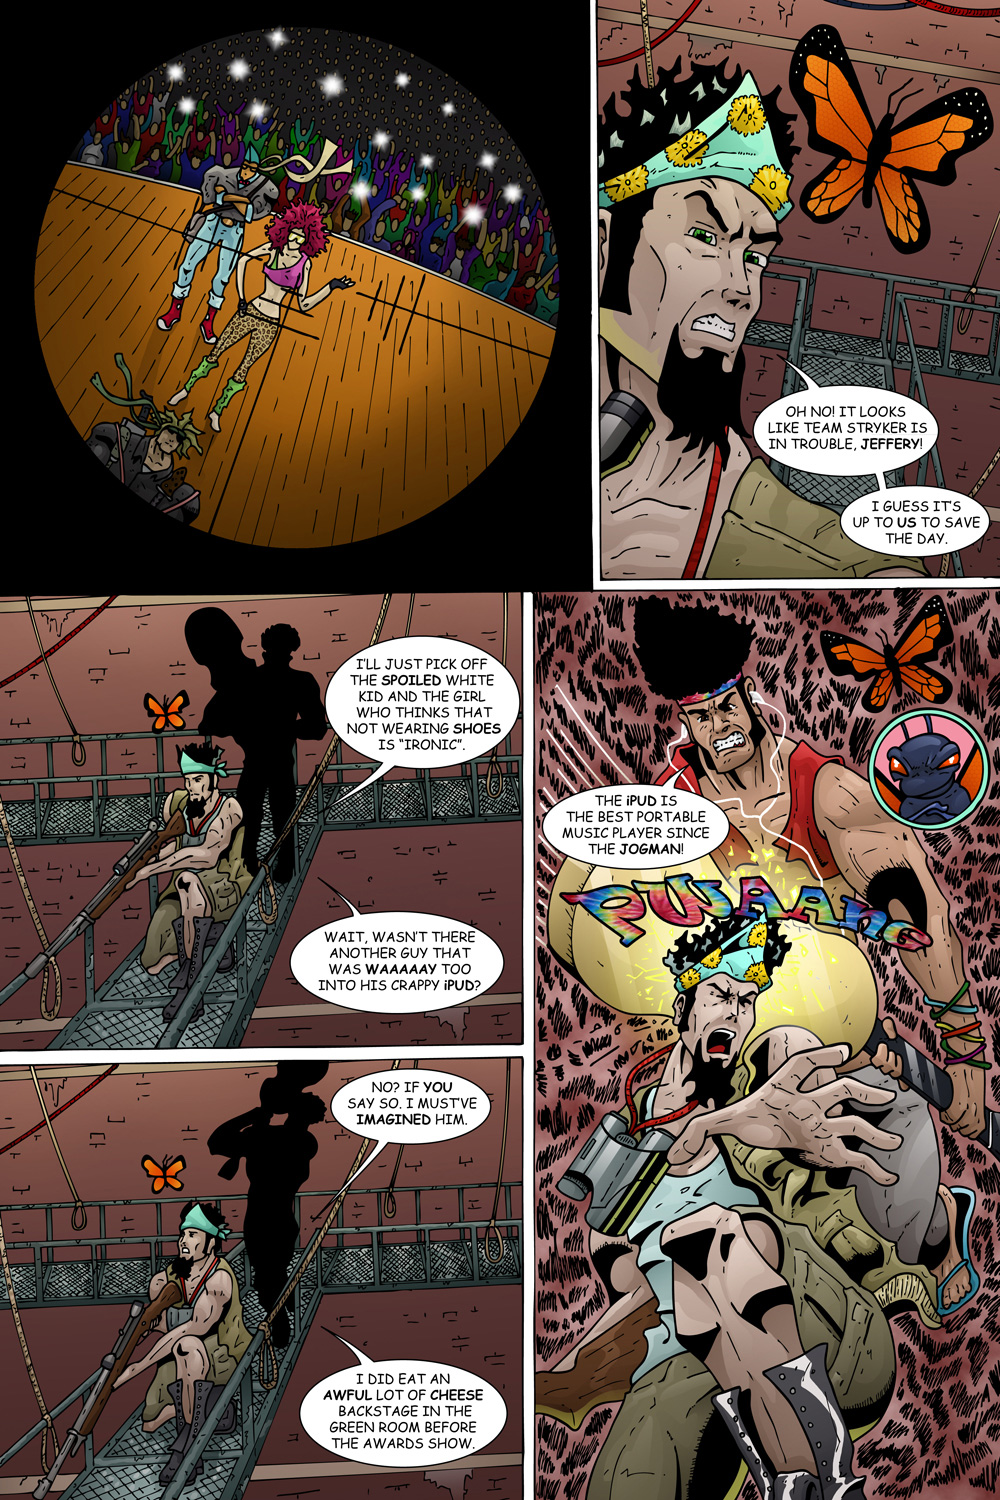 MISSION 004: PAGE 12 “AN AWFUL LOT OF CHEESE”